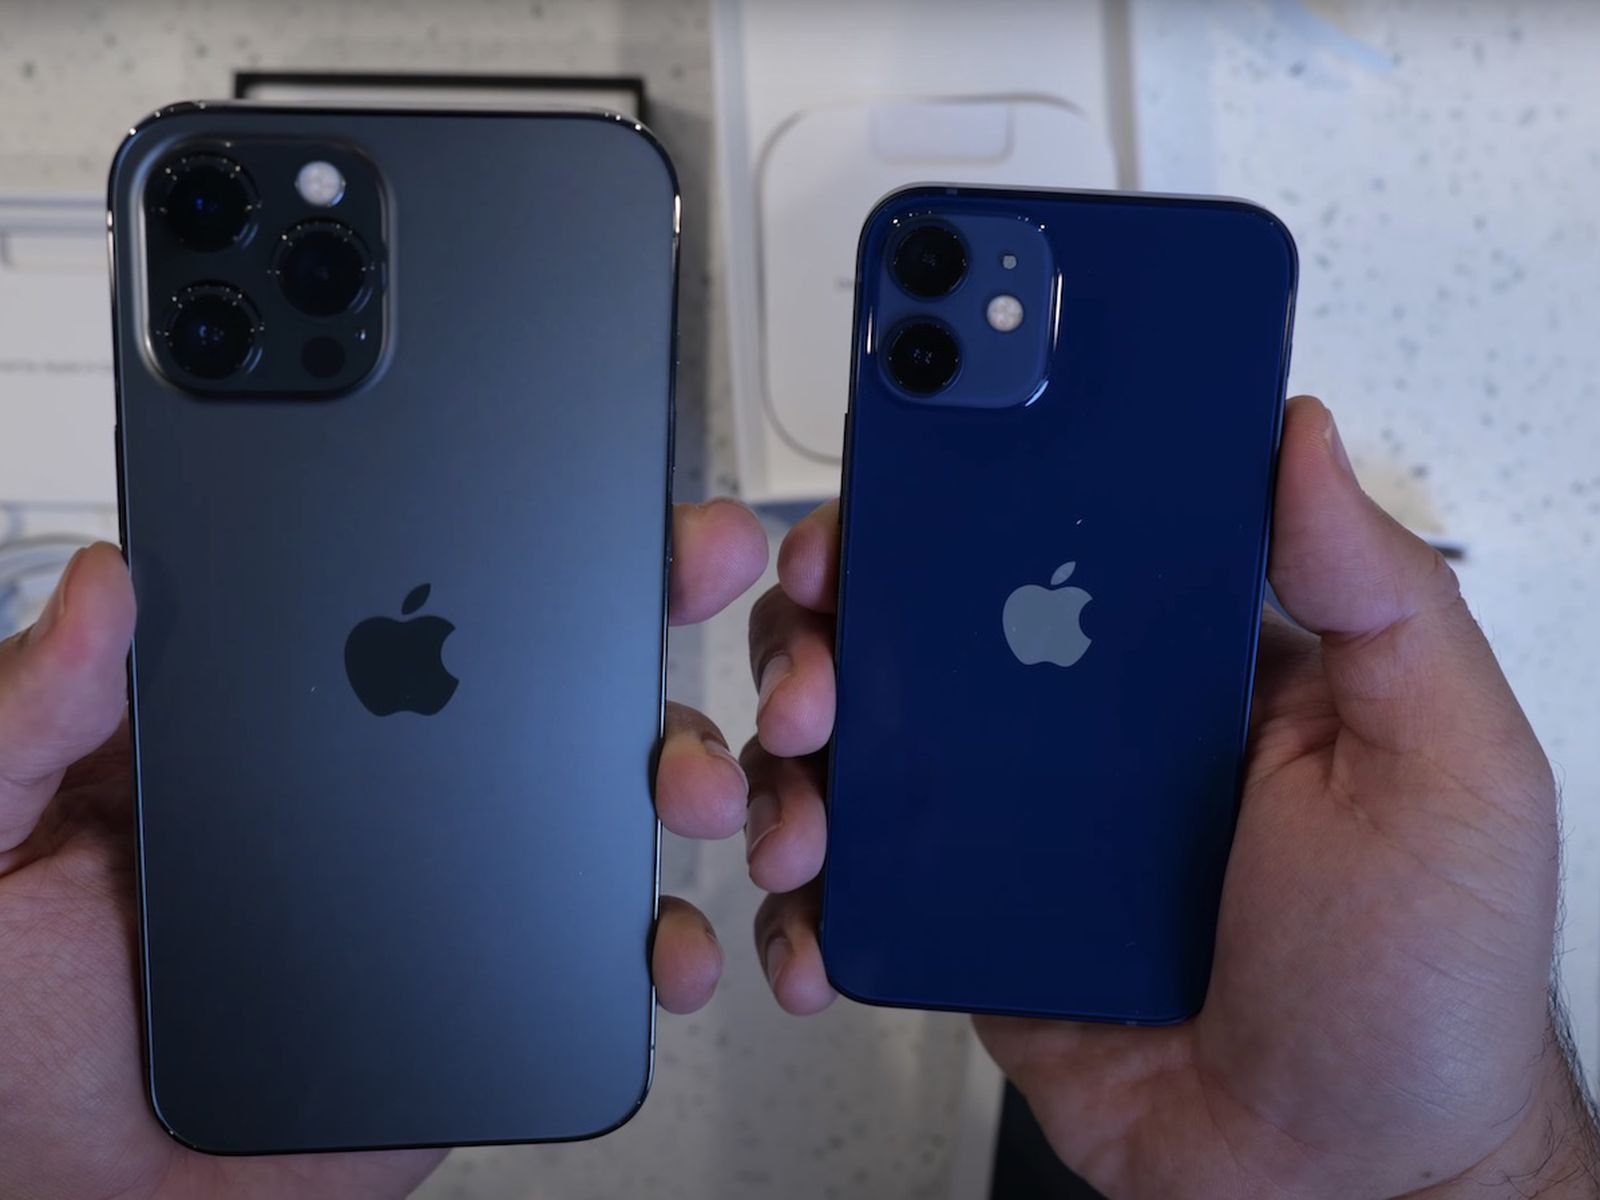 Watch Iphone 12 And Iphone 12 Pro Unboxing Videos And First Impressions